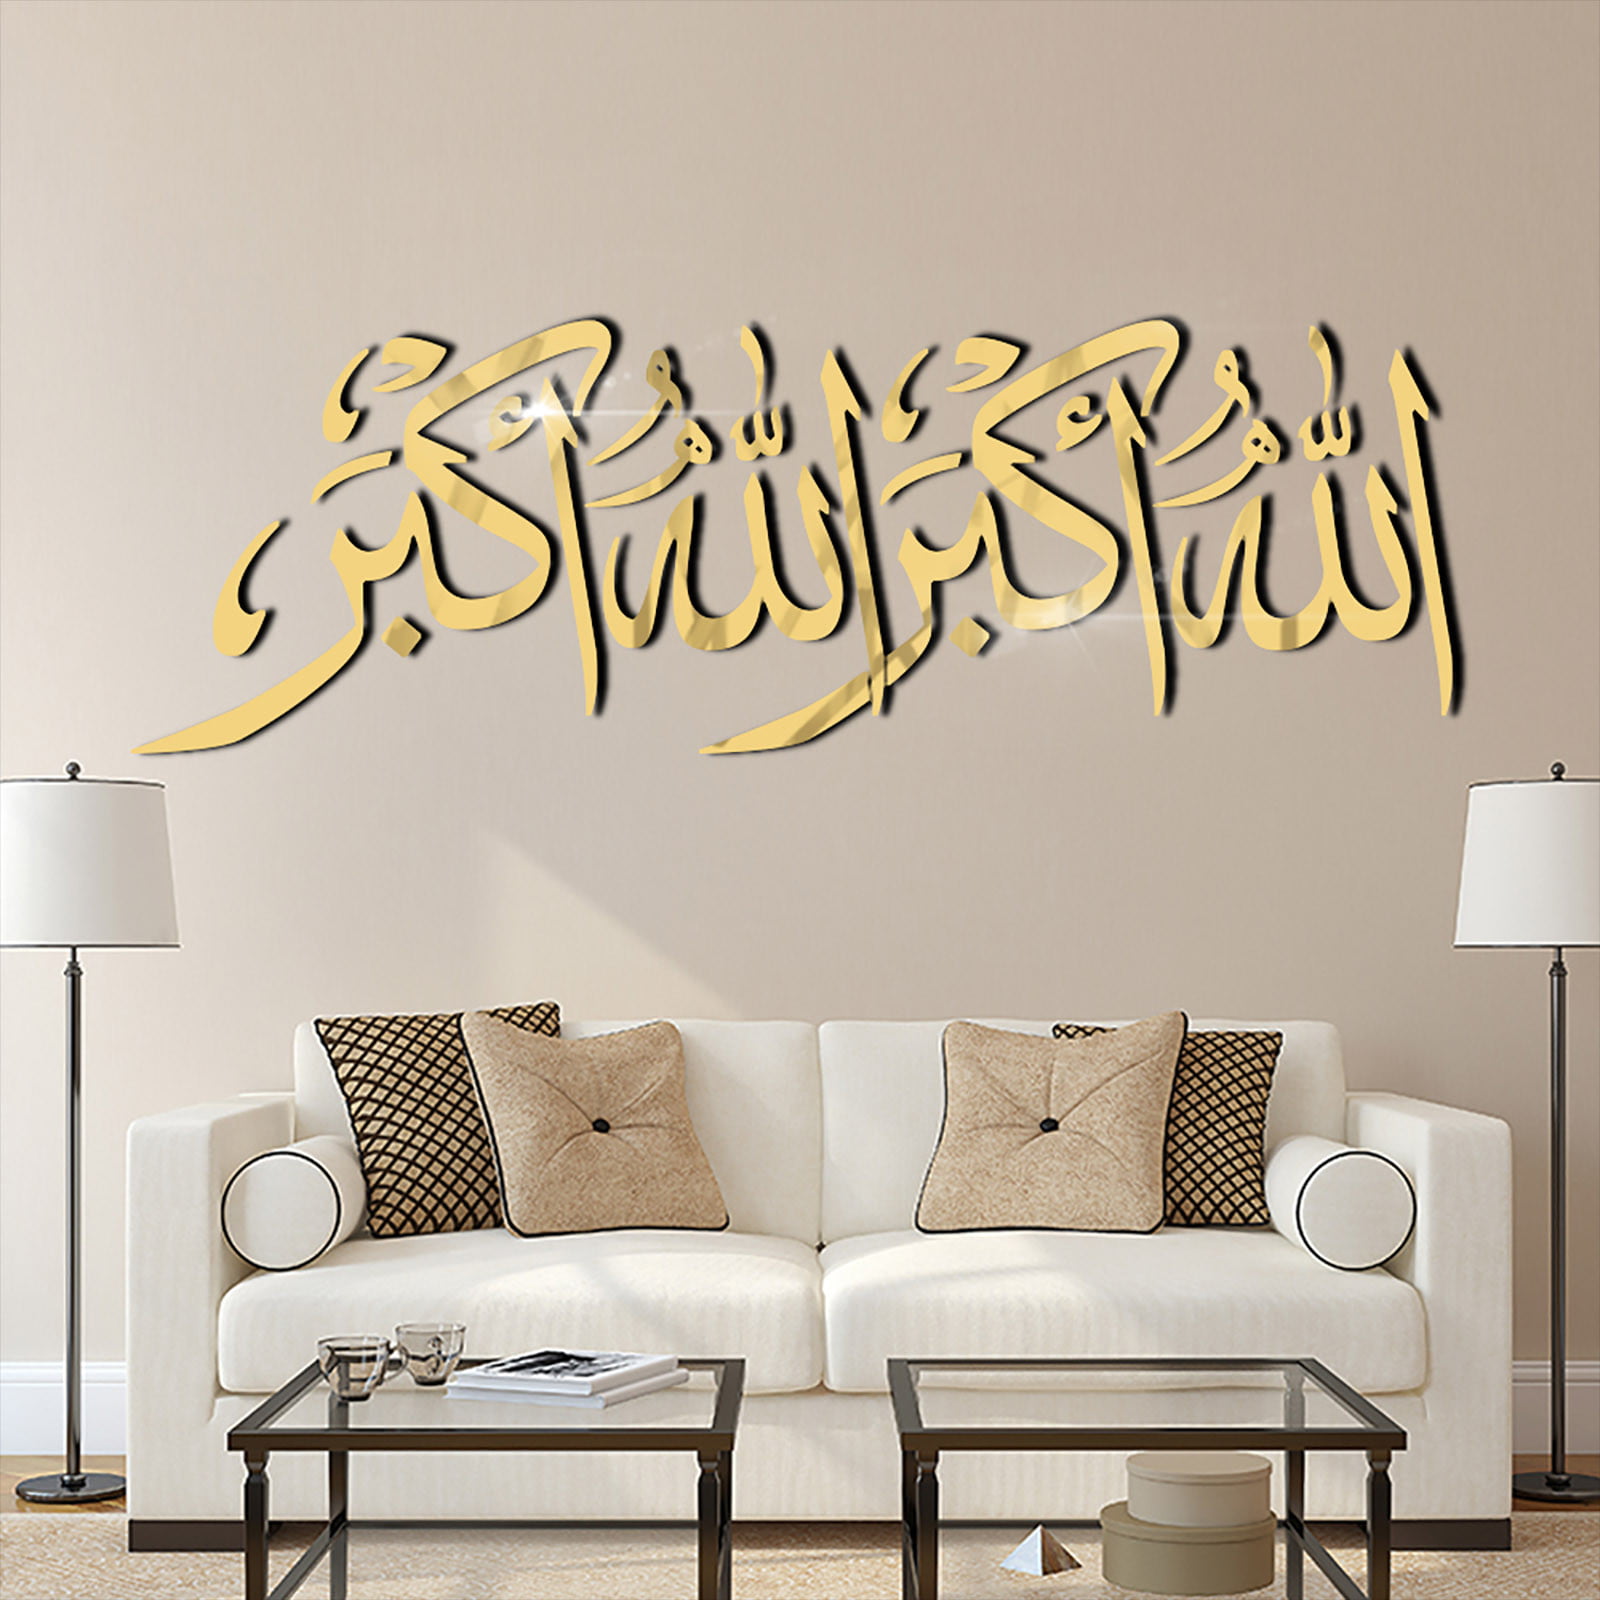 Details about   Muslim Mirror Acrylic Wall Sticker Decal Home Living Room Mural Decor Art 